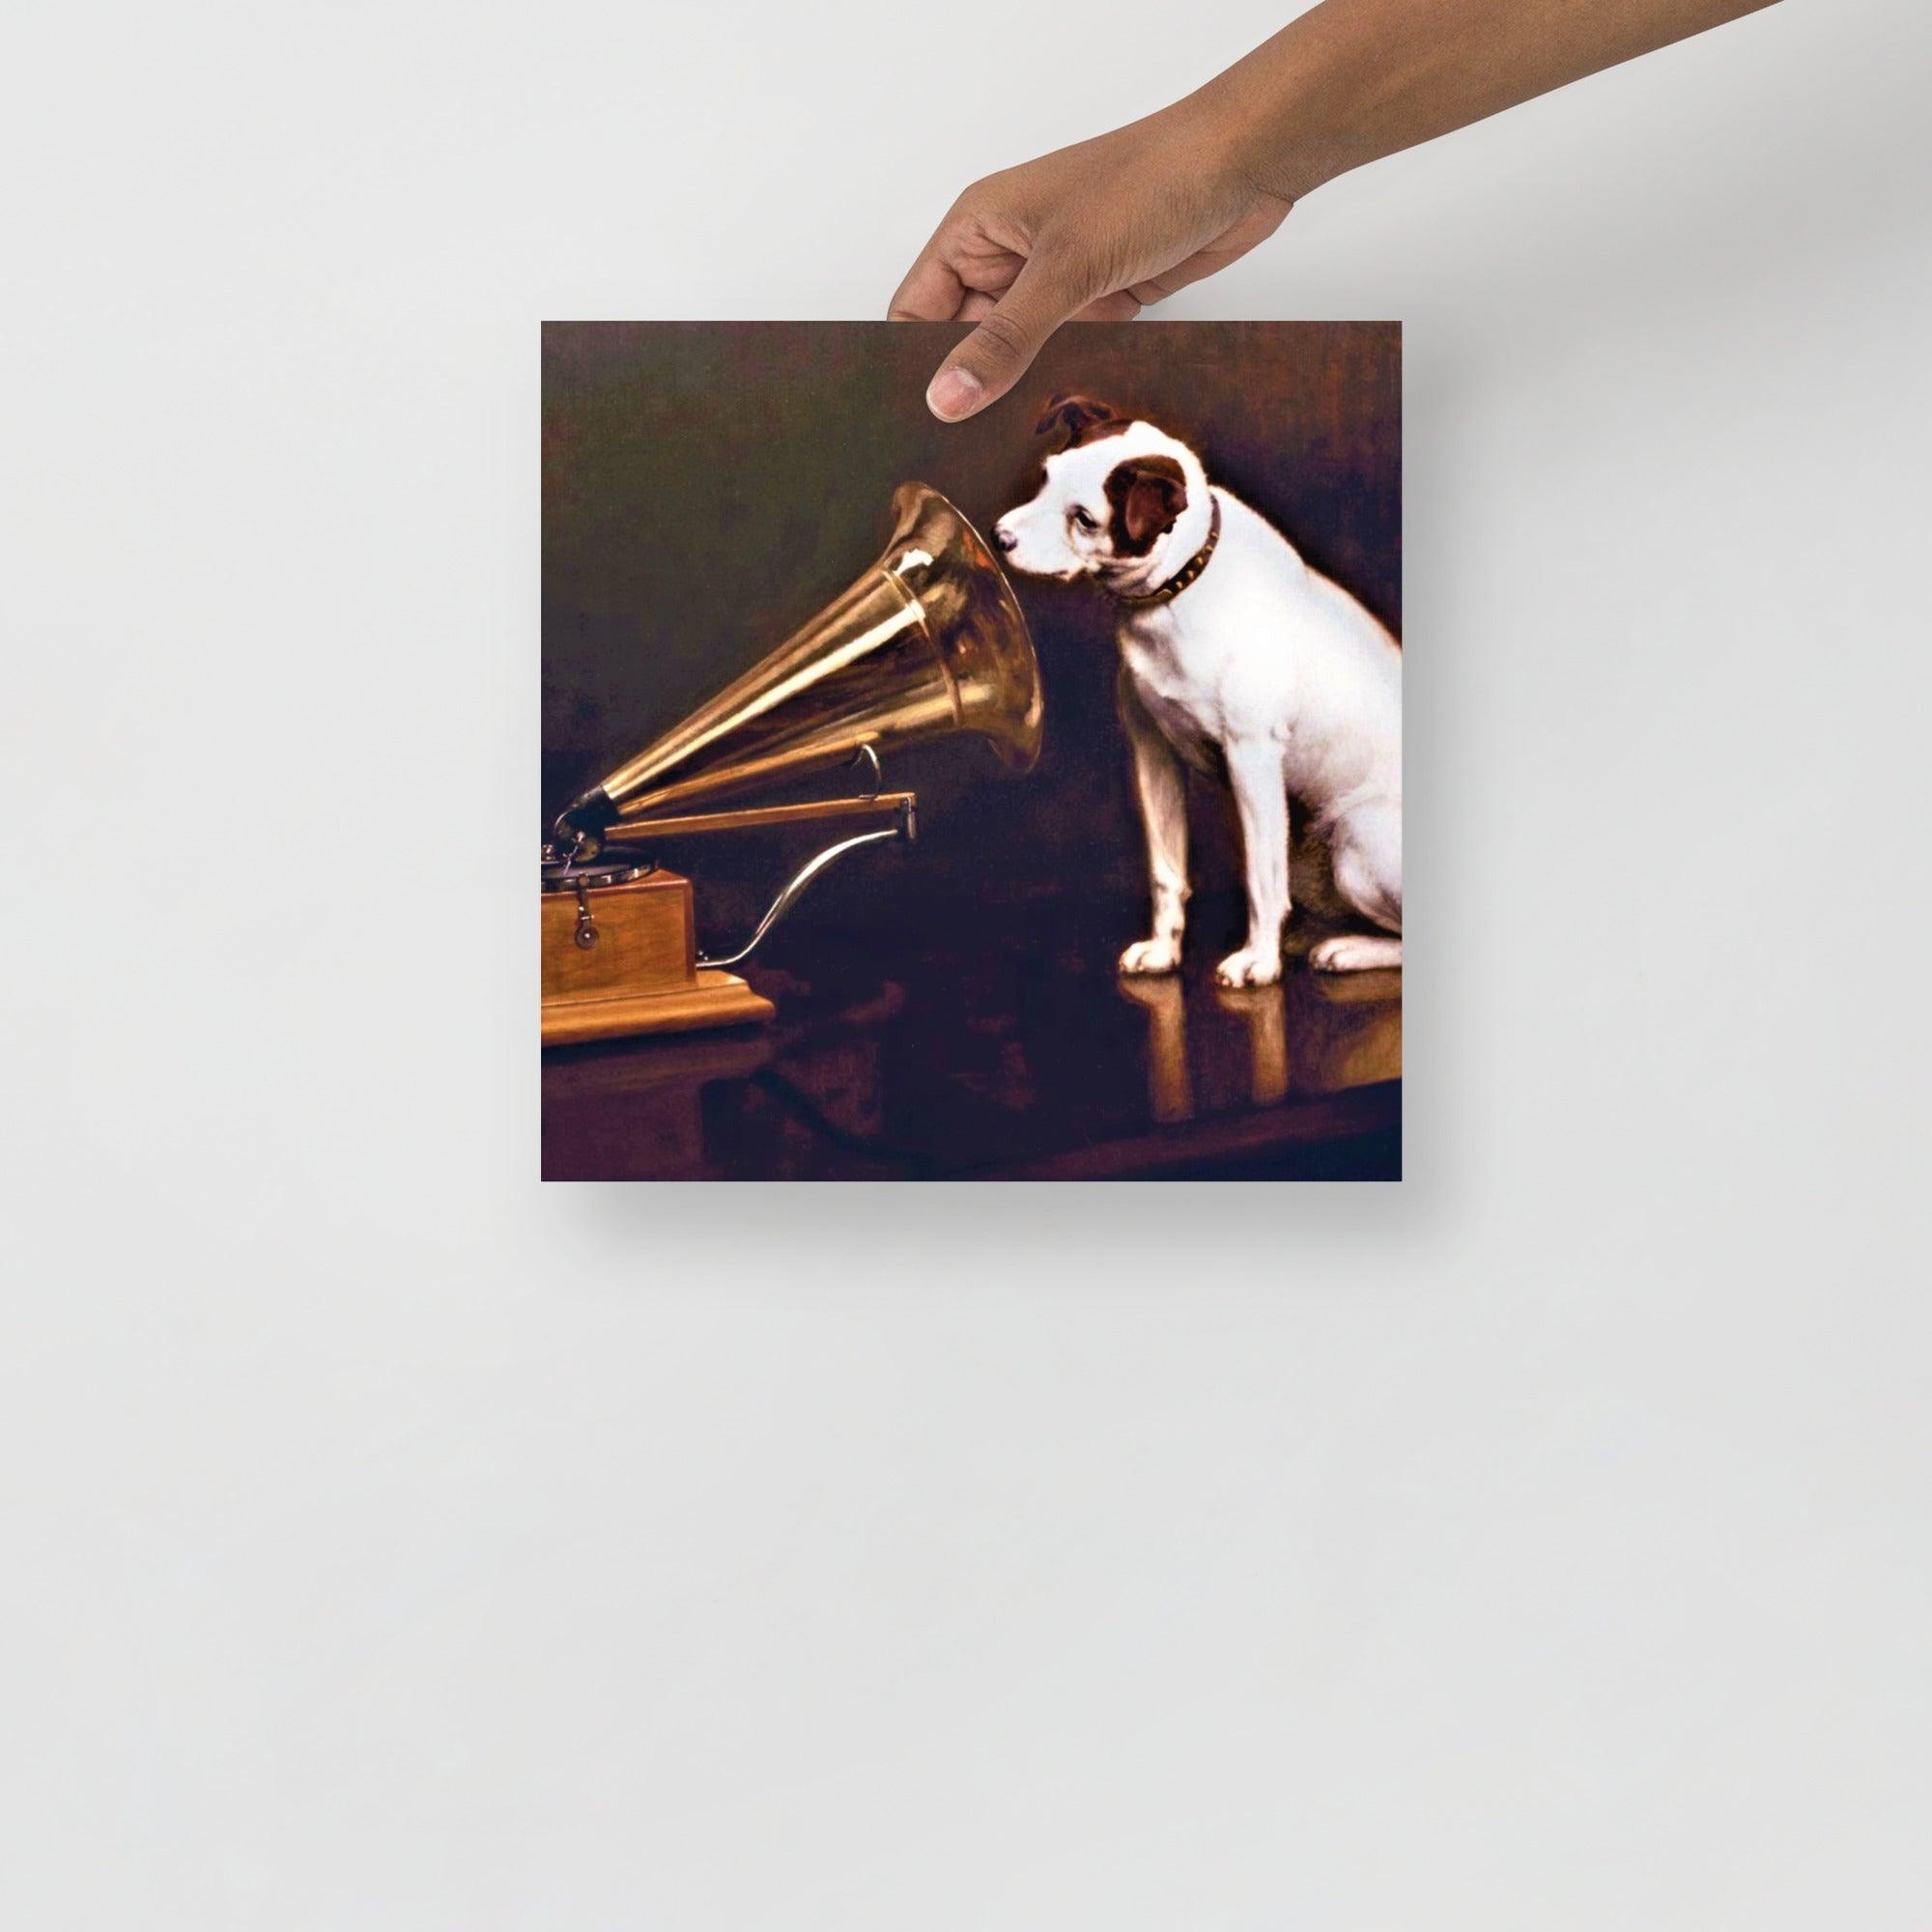 A His Master's Voice By Francis Barraud poster on a plain backdrop in size 12x12”.